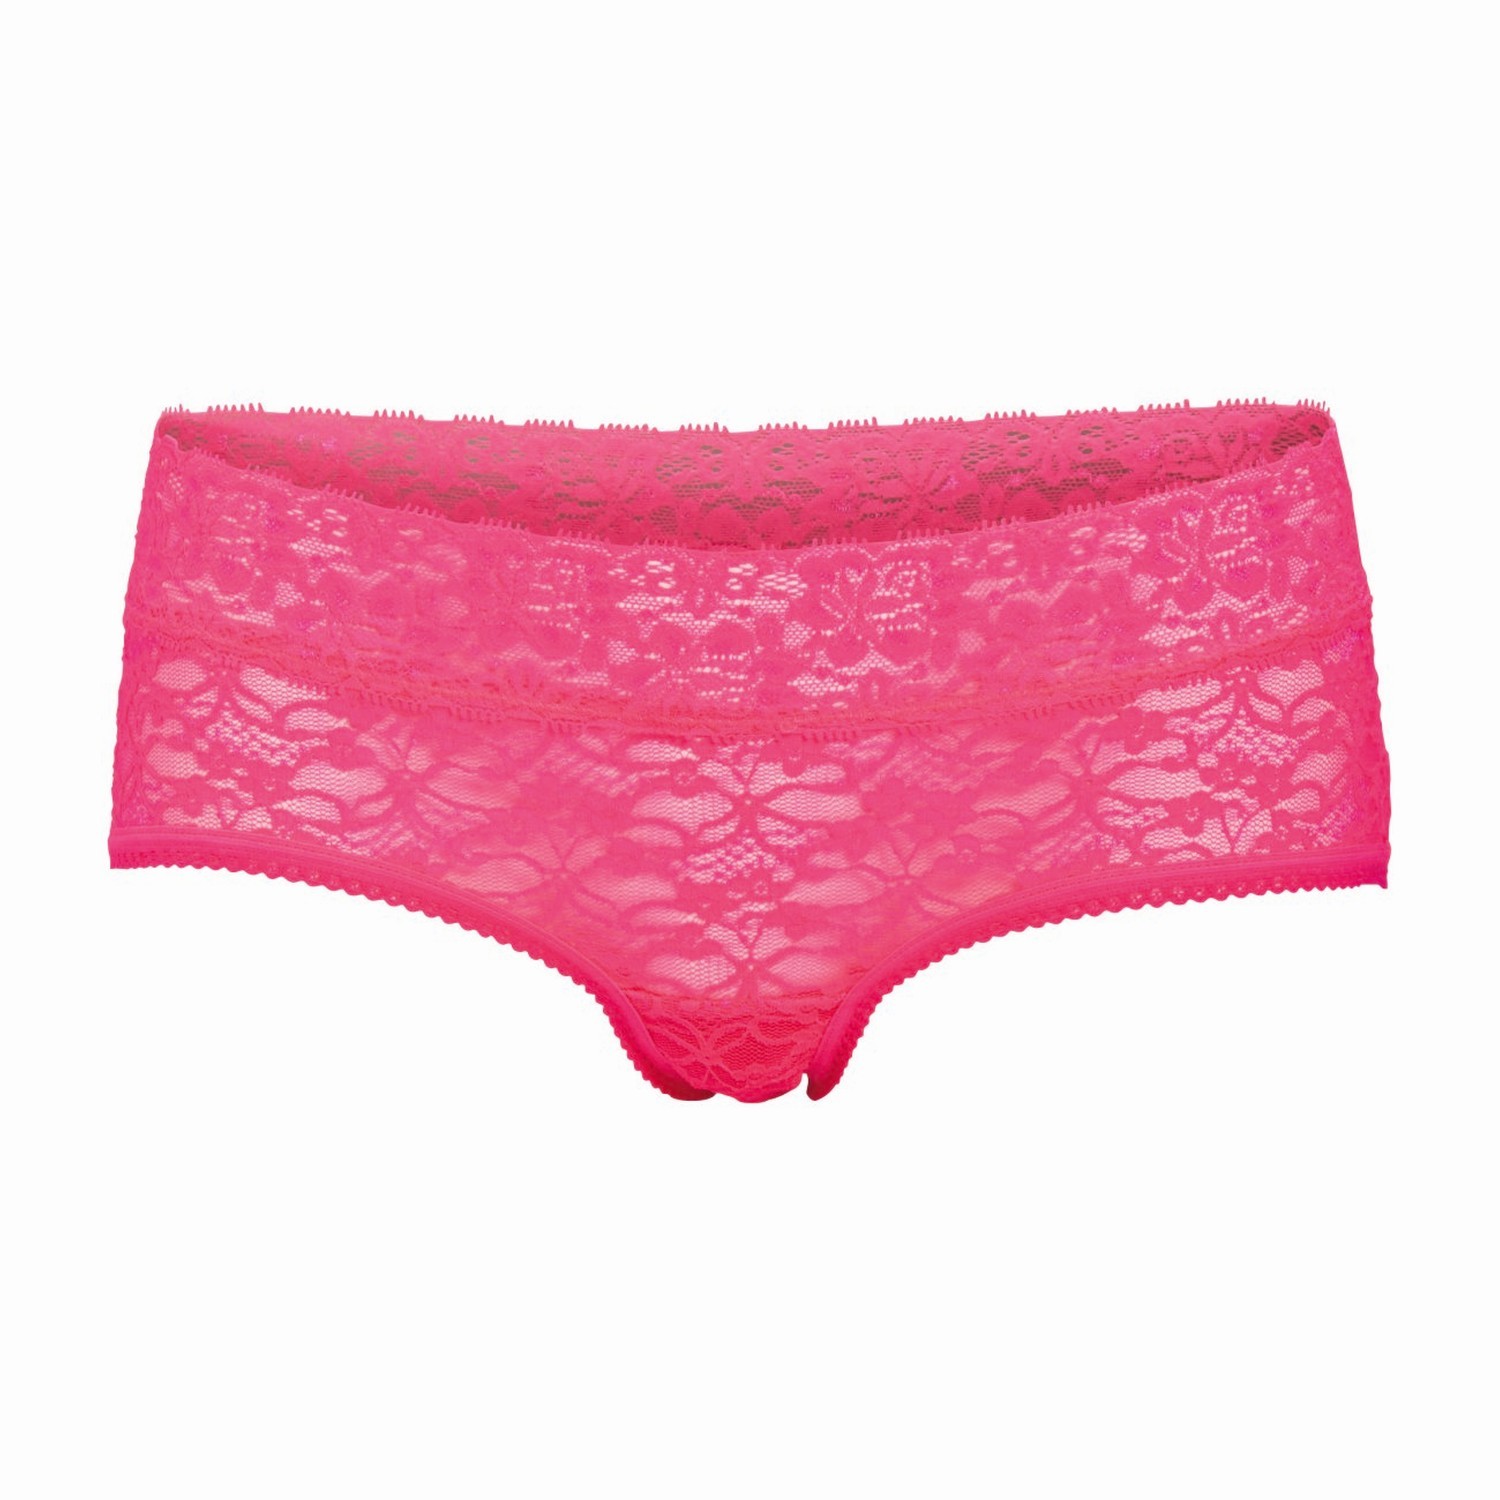 Björn Borg Love All Lace Hotpant 141184 Pink